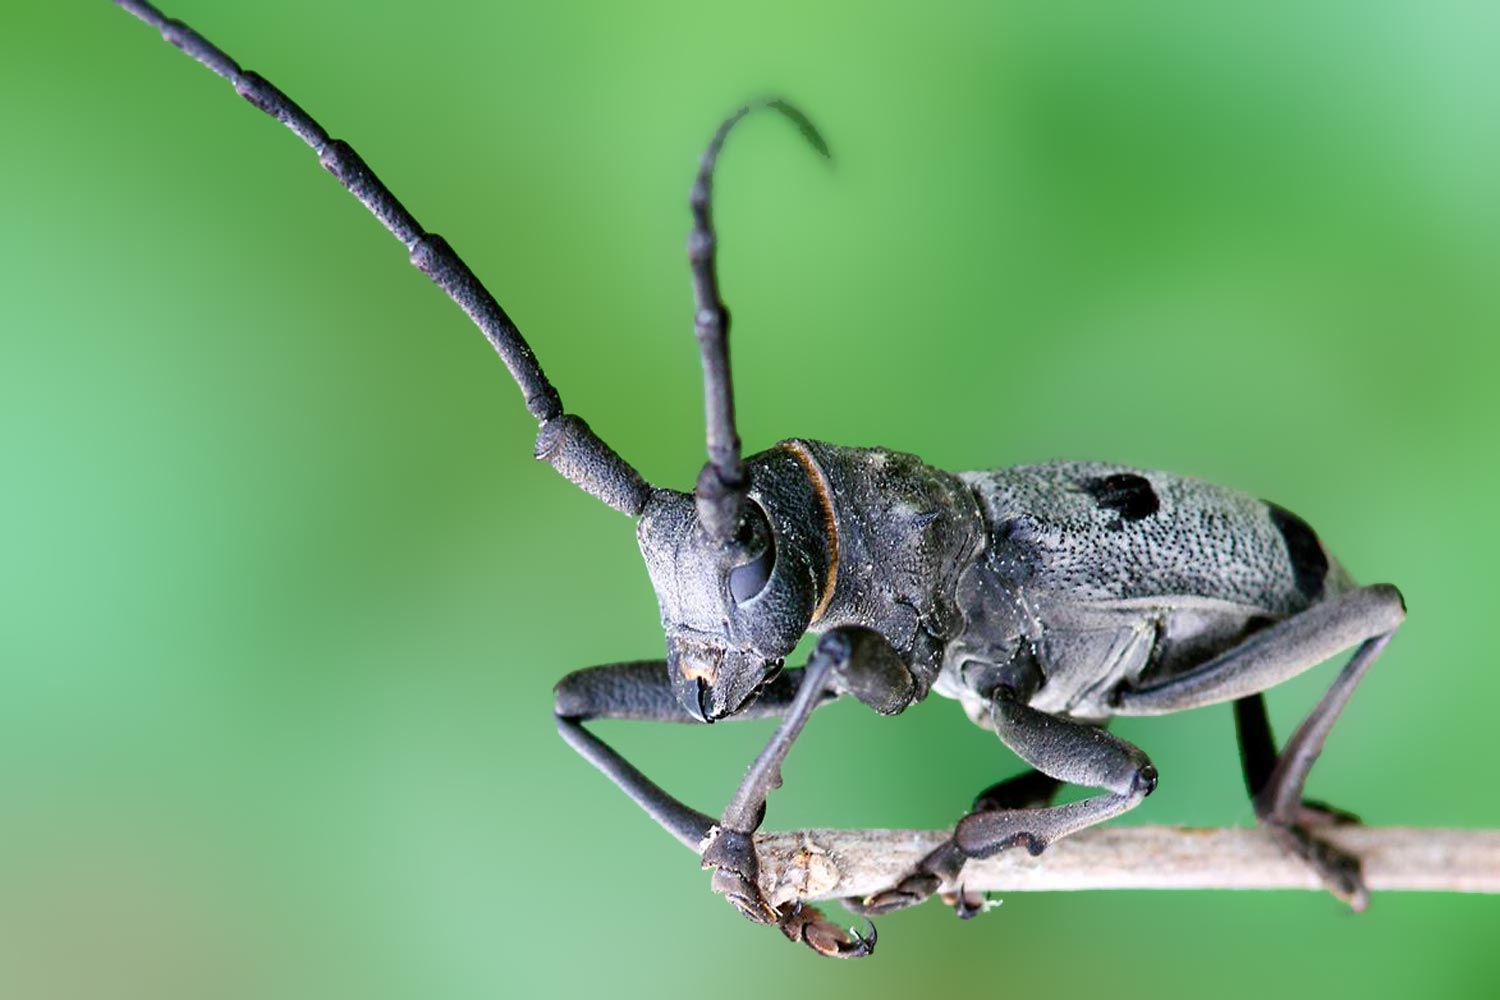  A grey and black longhorn beetle perches on a brown branch against a blurred green background.